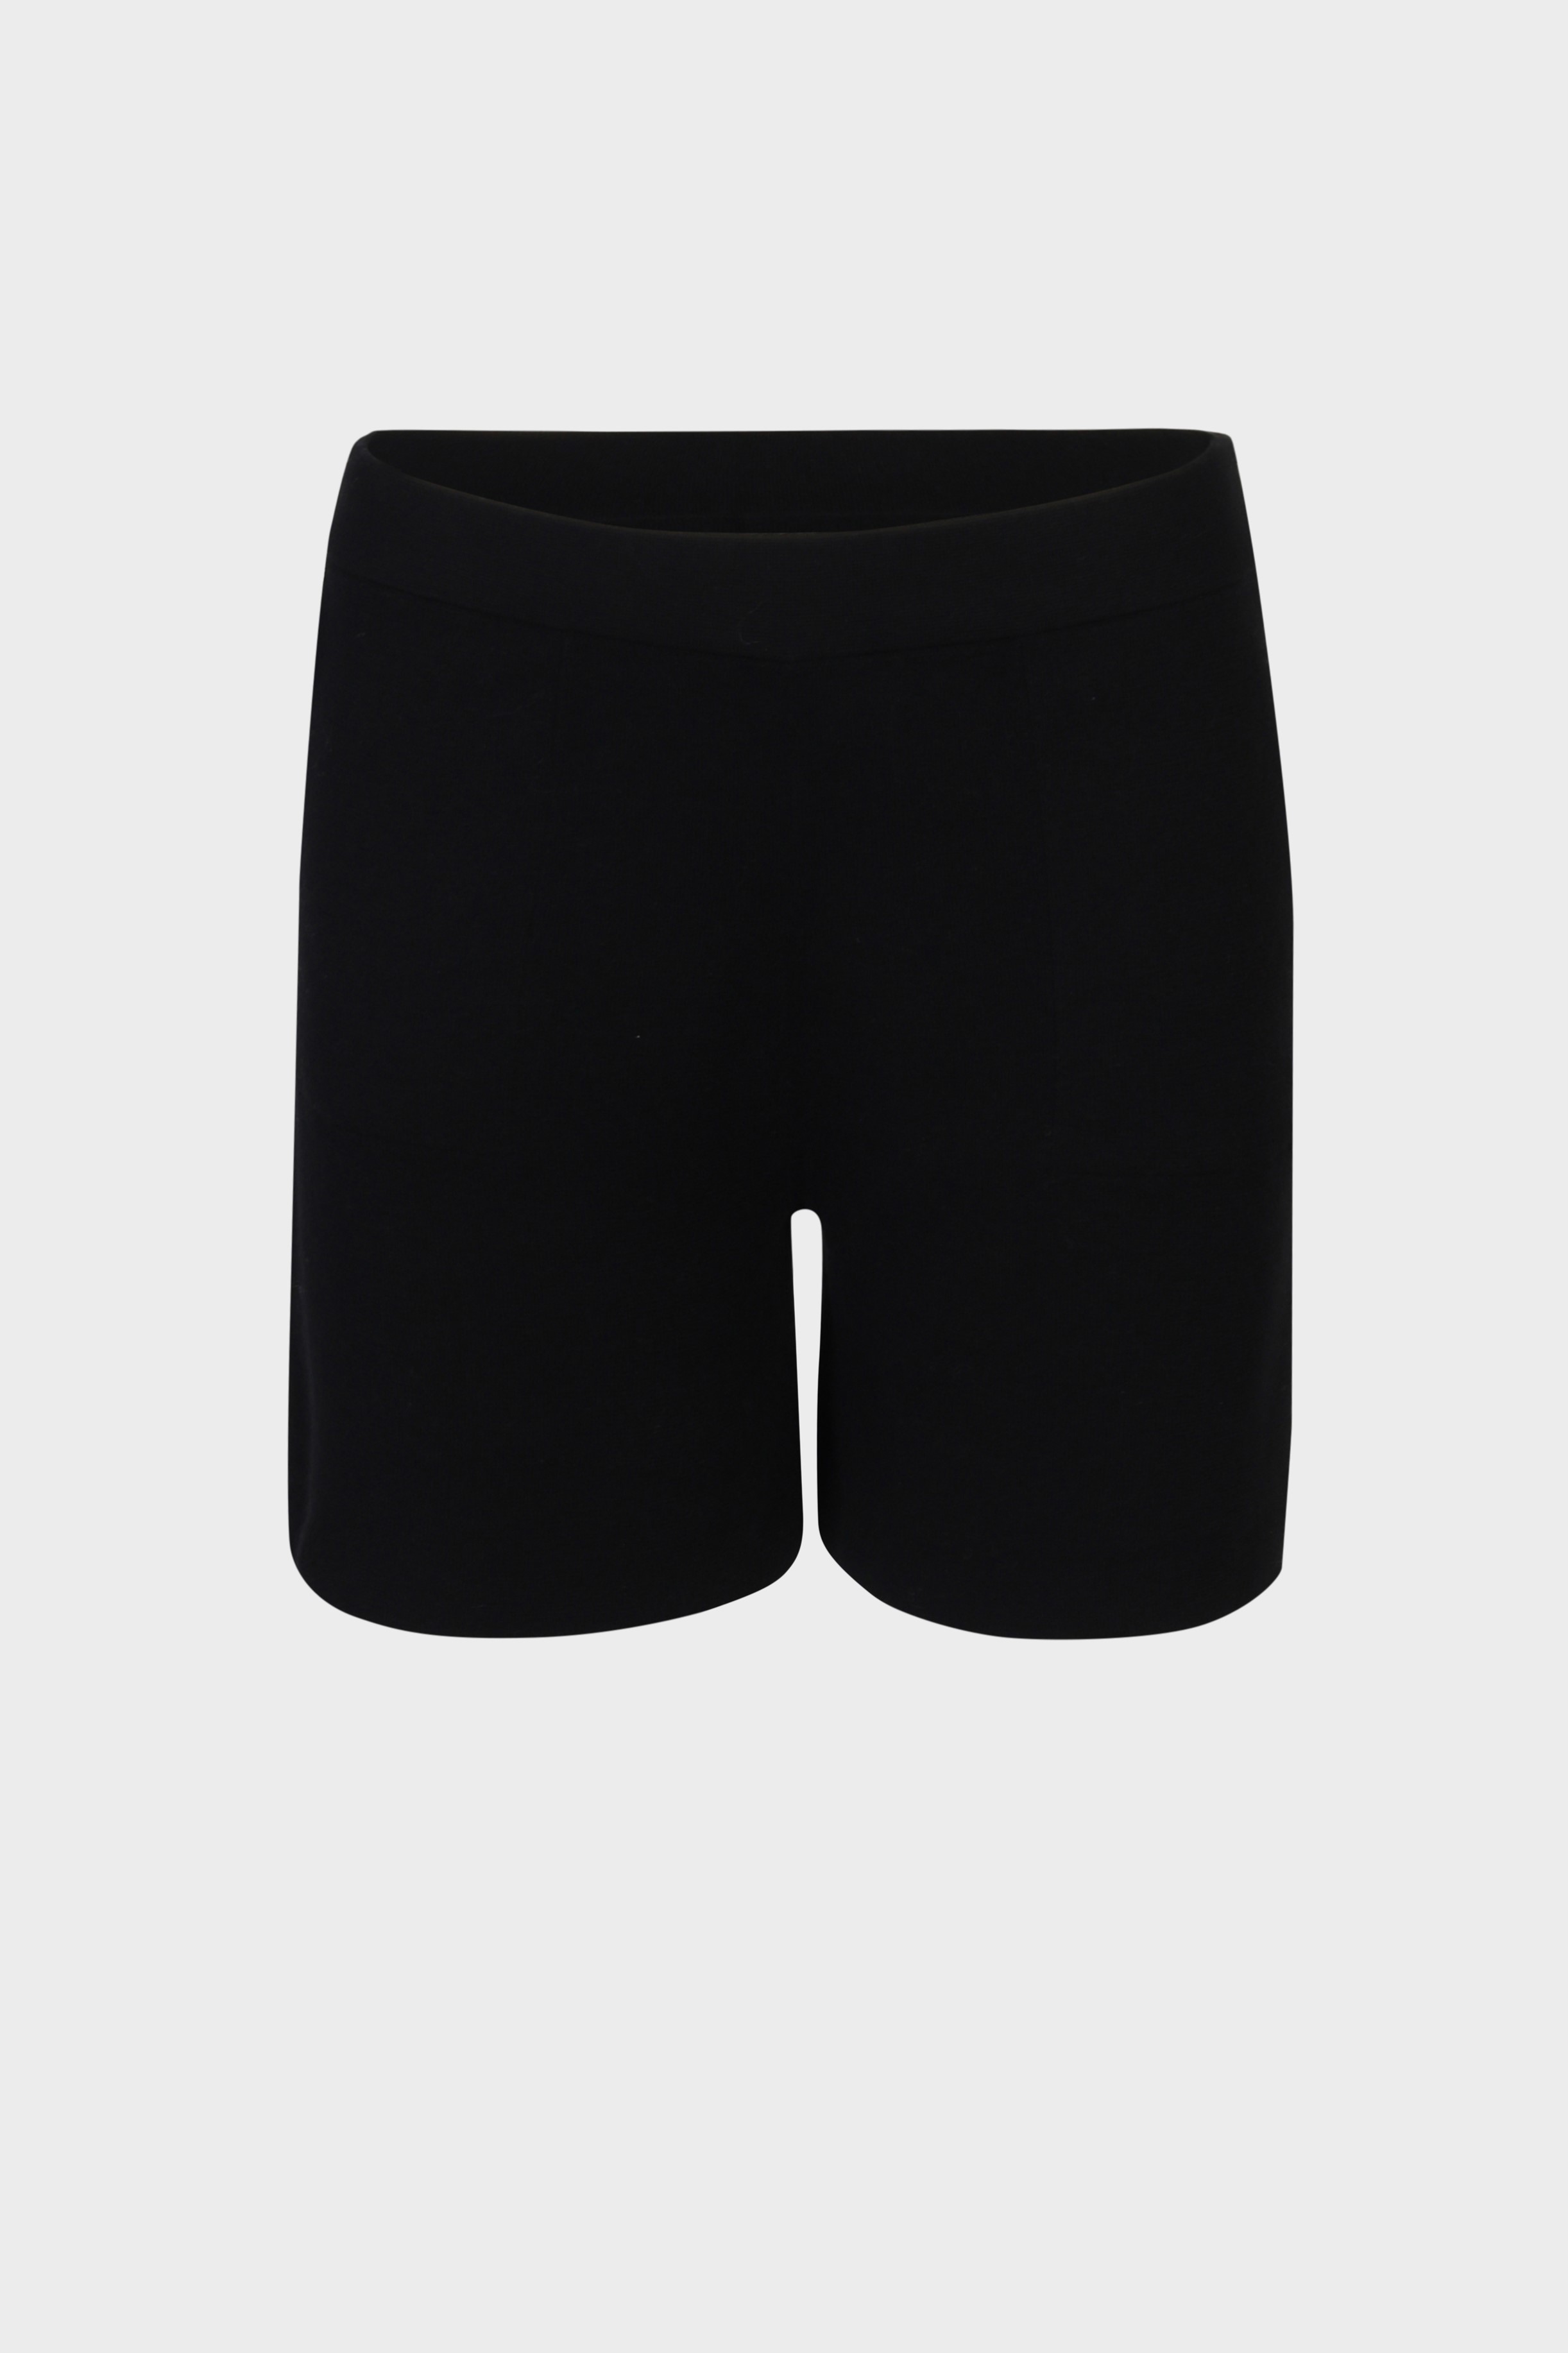 SMINFINITY Comfy Knit Shorts in Black 